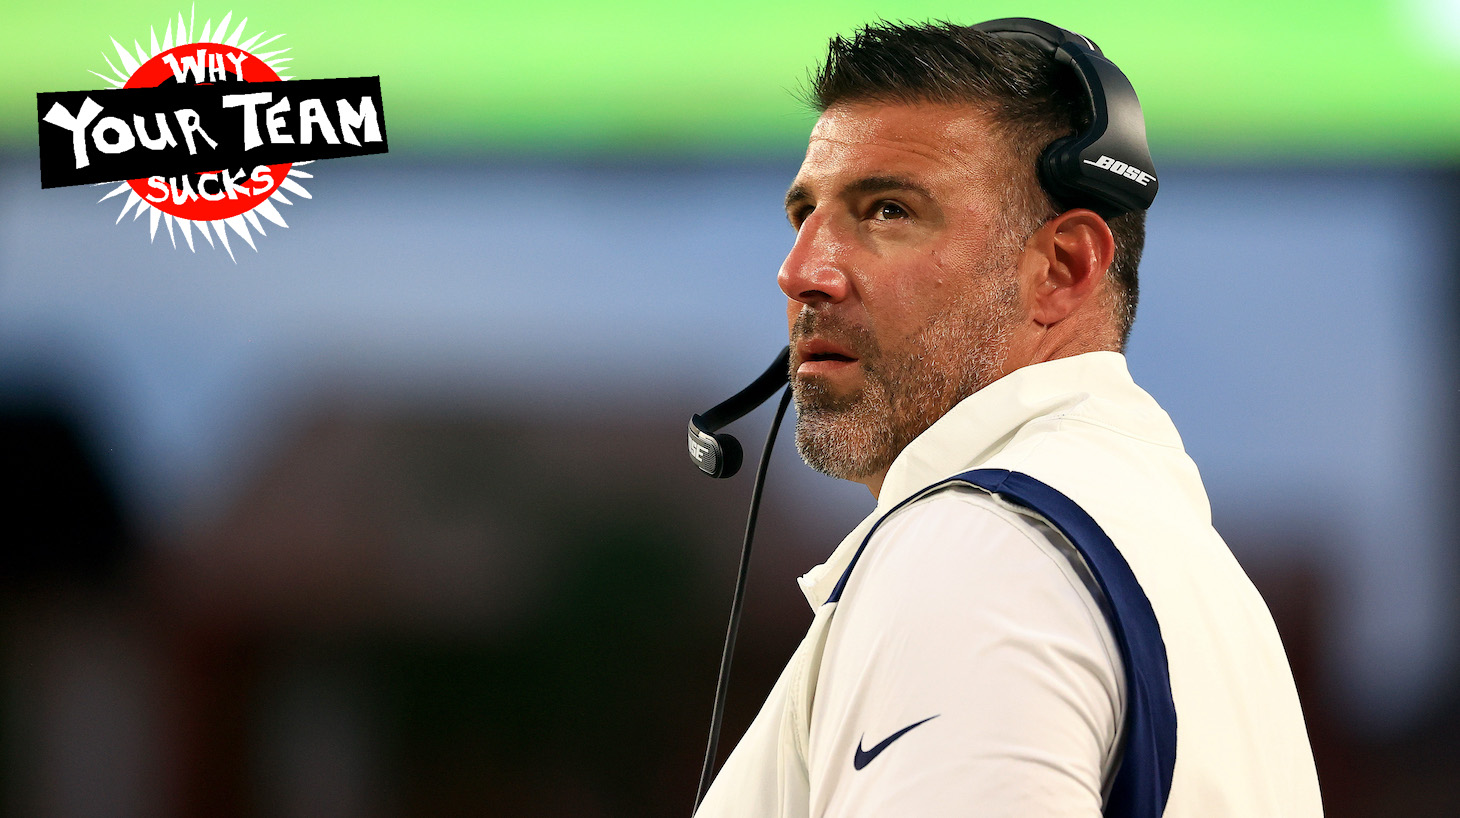 TAMPA, FLORIDA - AUGUST 21: Head coach Mike Vrabel of the Tennessee Titans looks on during a preseason game against the Tampa Bay Buccaneers at Raymond James Stadium on August 21, 2021 in Tampa, Florida. (Photo by Mike Ehrmann/Getty Images)